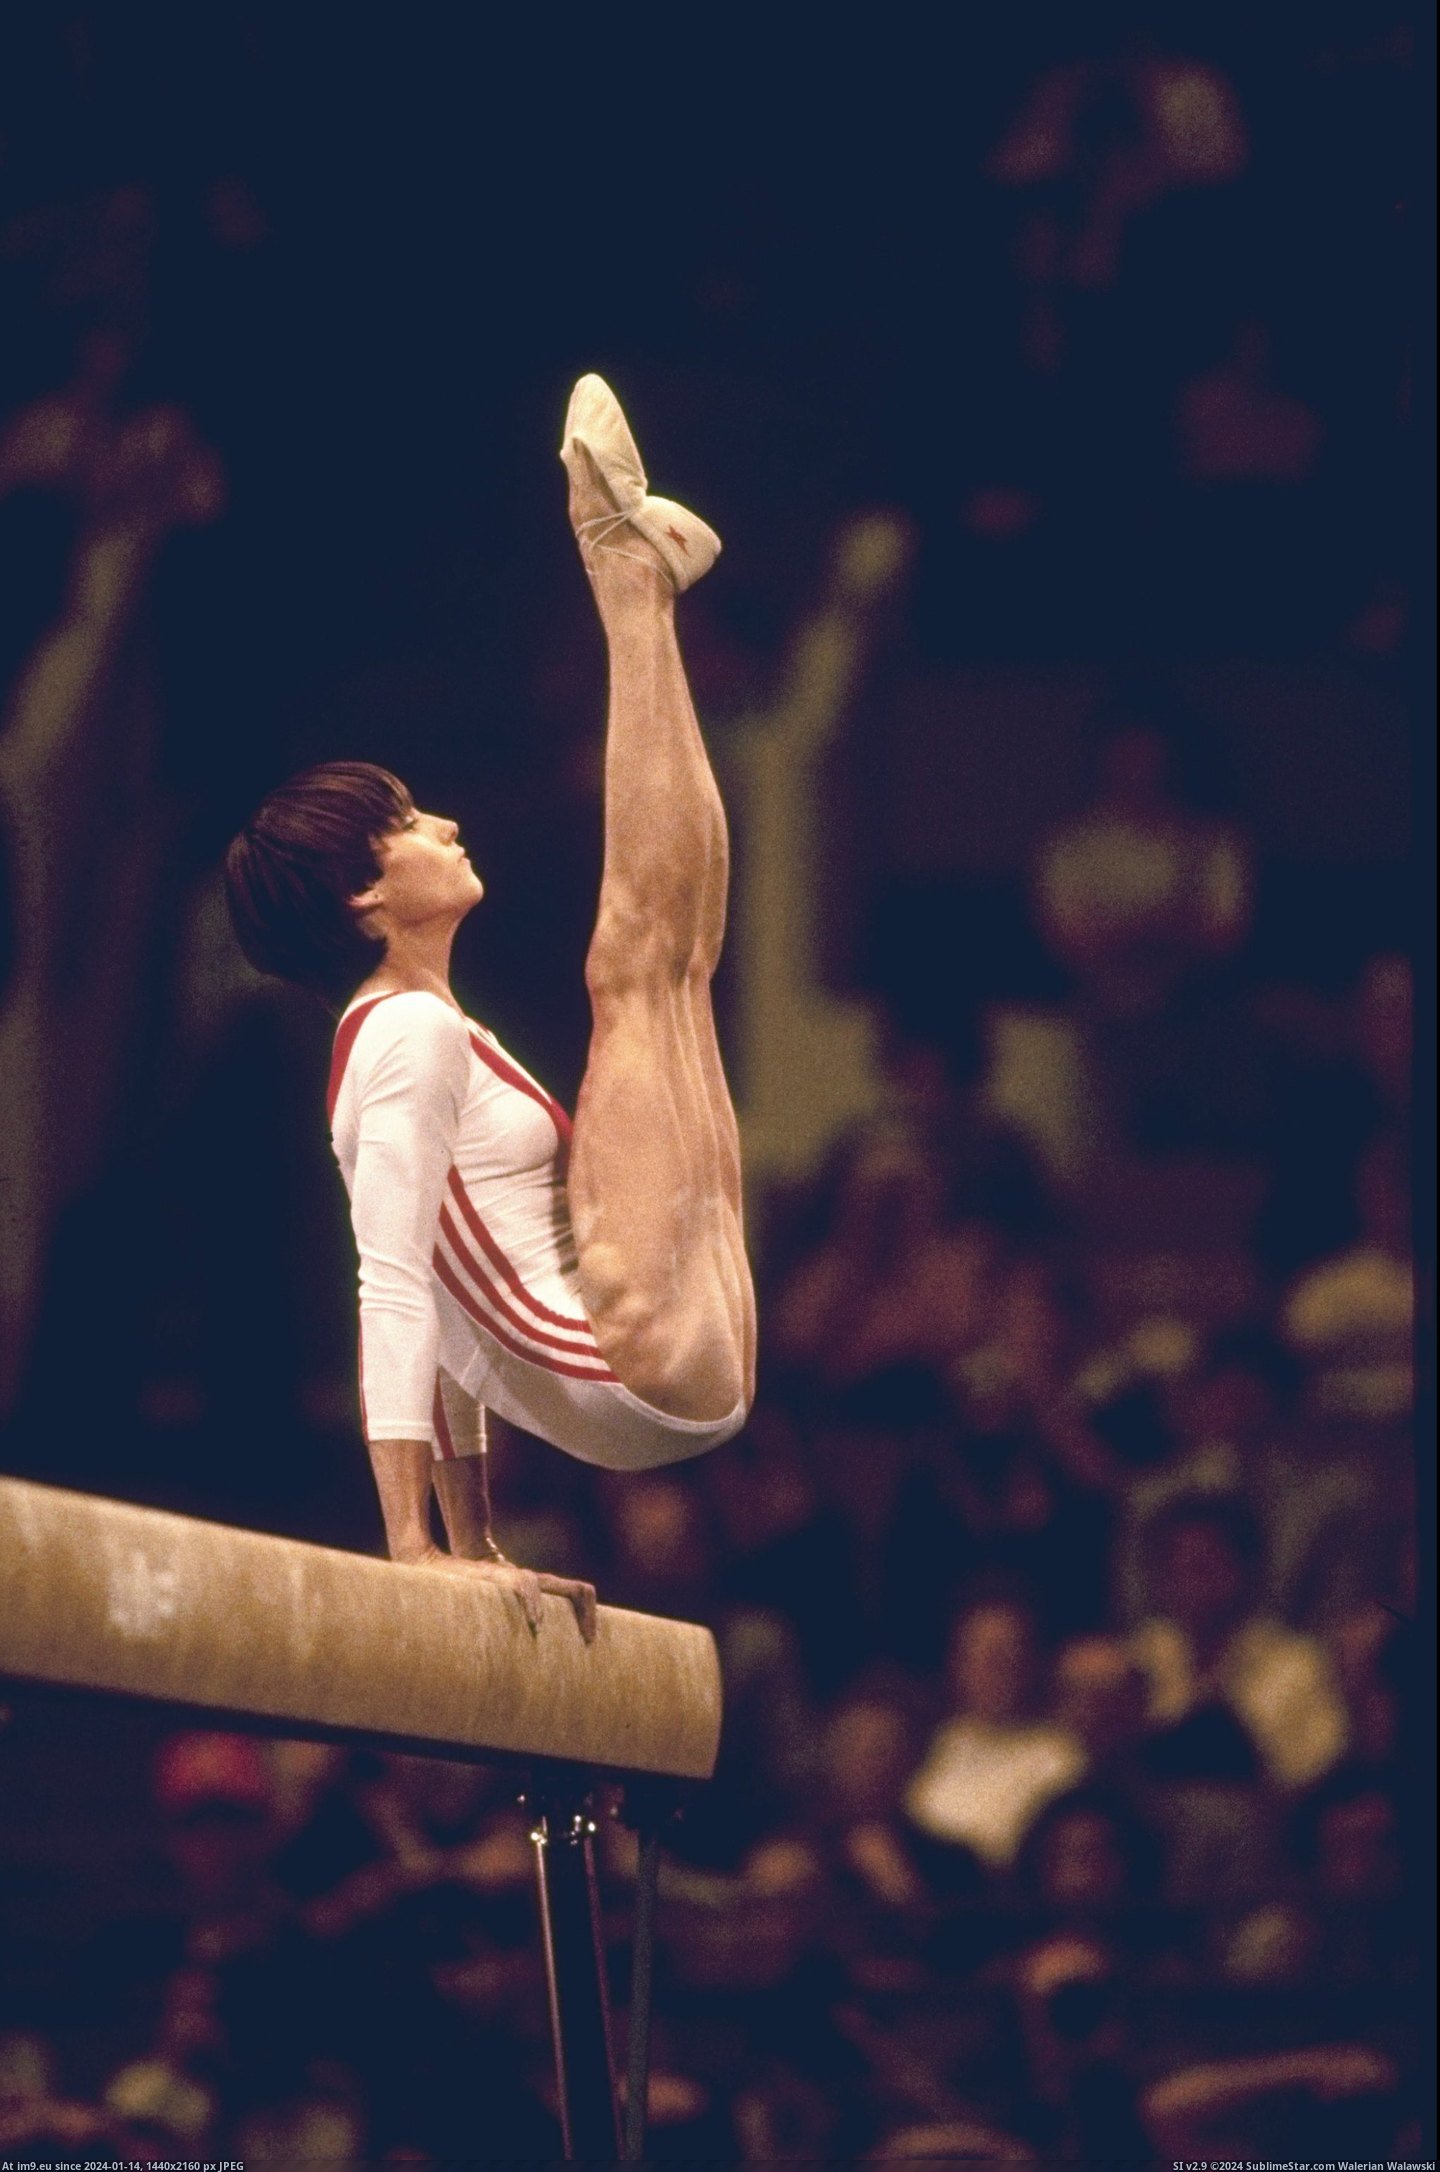 #Perfect #Leg #History #Nadia #Comaneci #Age #Muscles #Olympic [Pics] Leg muscles of the first perfect 10 in Olympic history, at age 14. Nadia Comaneci. Pic. (Image of album My r/PICS favs))